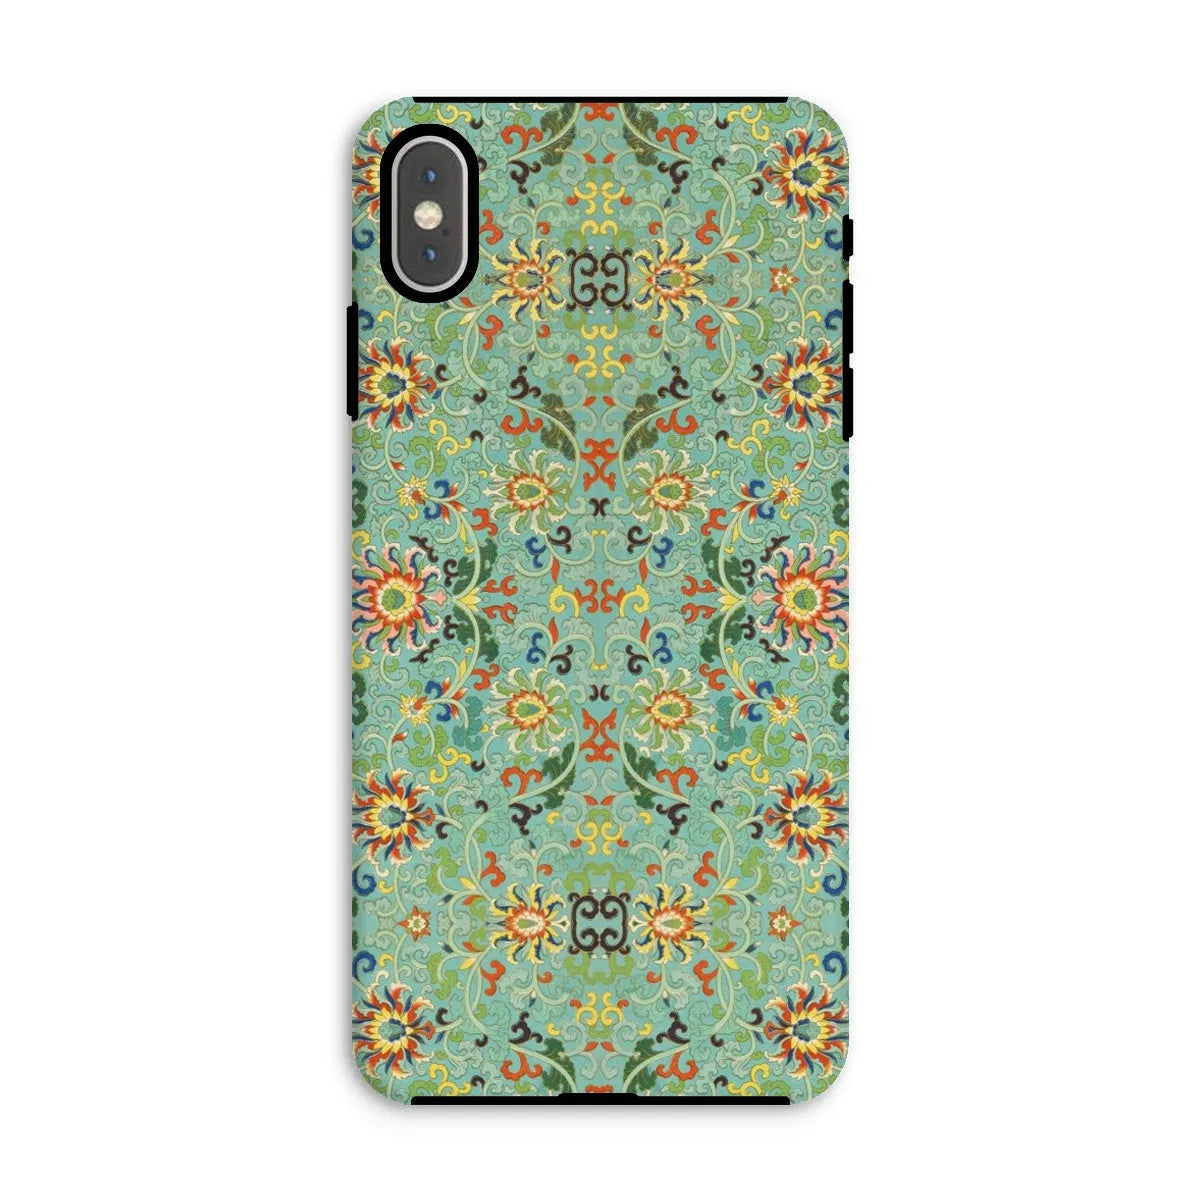 Lotus Candy - Chinese Aesthetic Pattern Art Phone Case - Iphone Xs Max / Matte - Mobile Phone Cases - Aesthetic Art